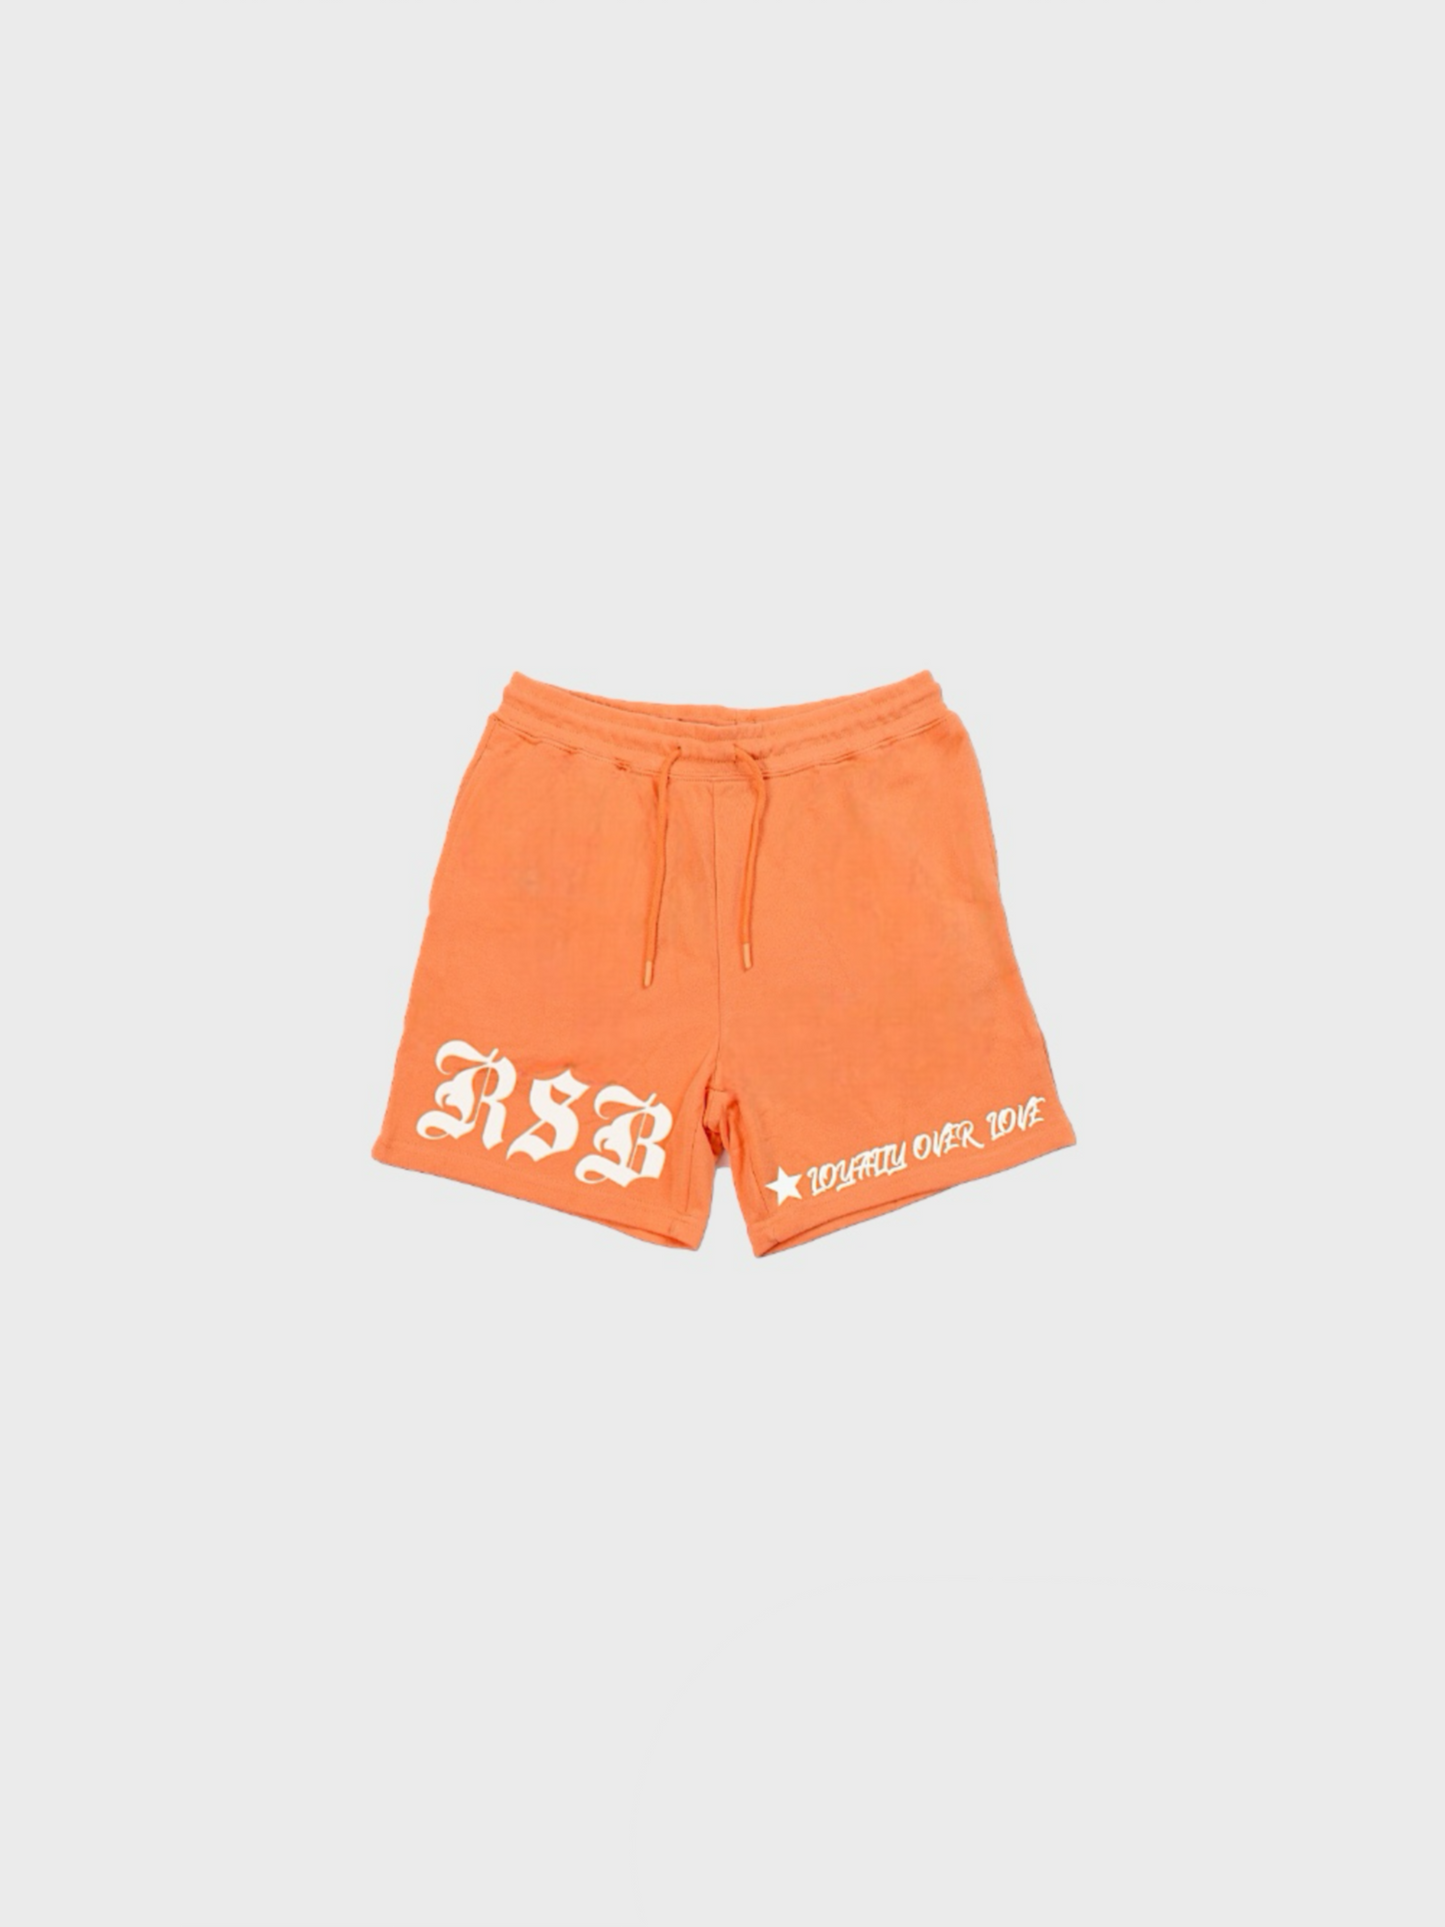 LOYALTY OVER LOVE SHORTS- PEACH/WHITE